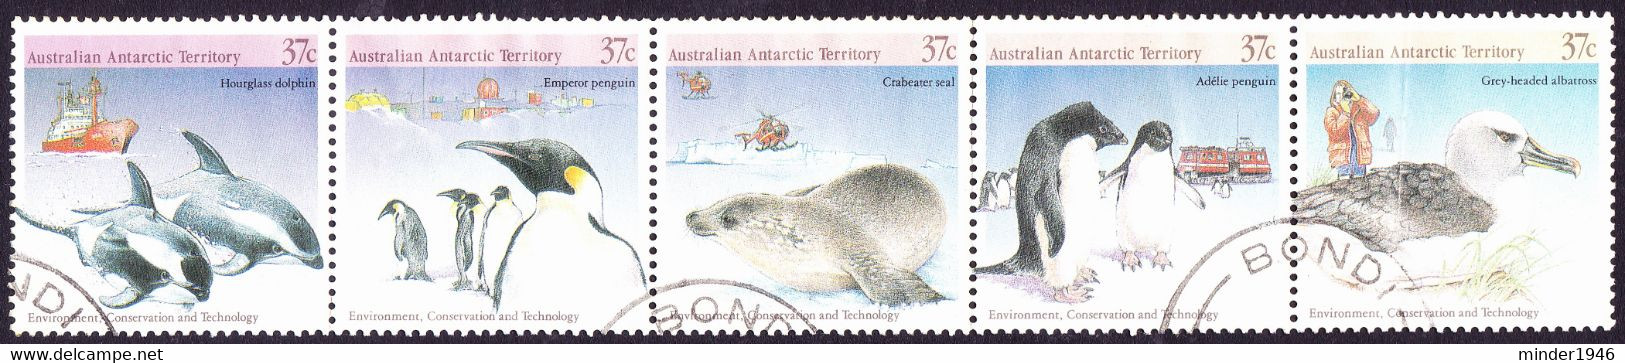 AUSTRALIAN ANTARCTIC TERRITORY (AAT) 1988 QEII 37c Stripe Of 5 ENVIRONMENT CONSERVATION TECHNOLOGY FU - Used Stamps